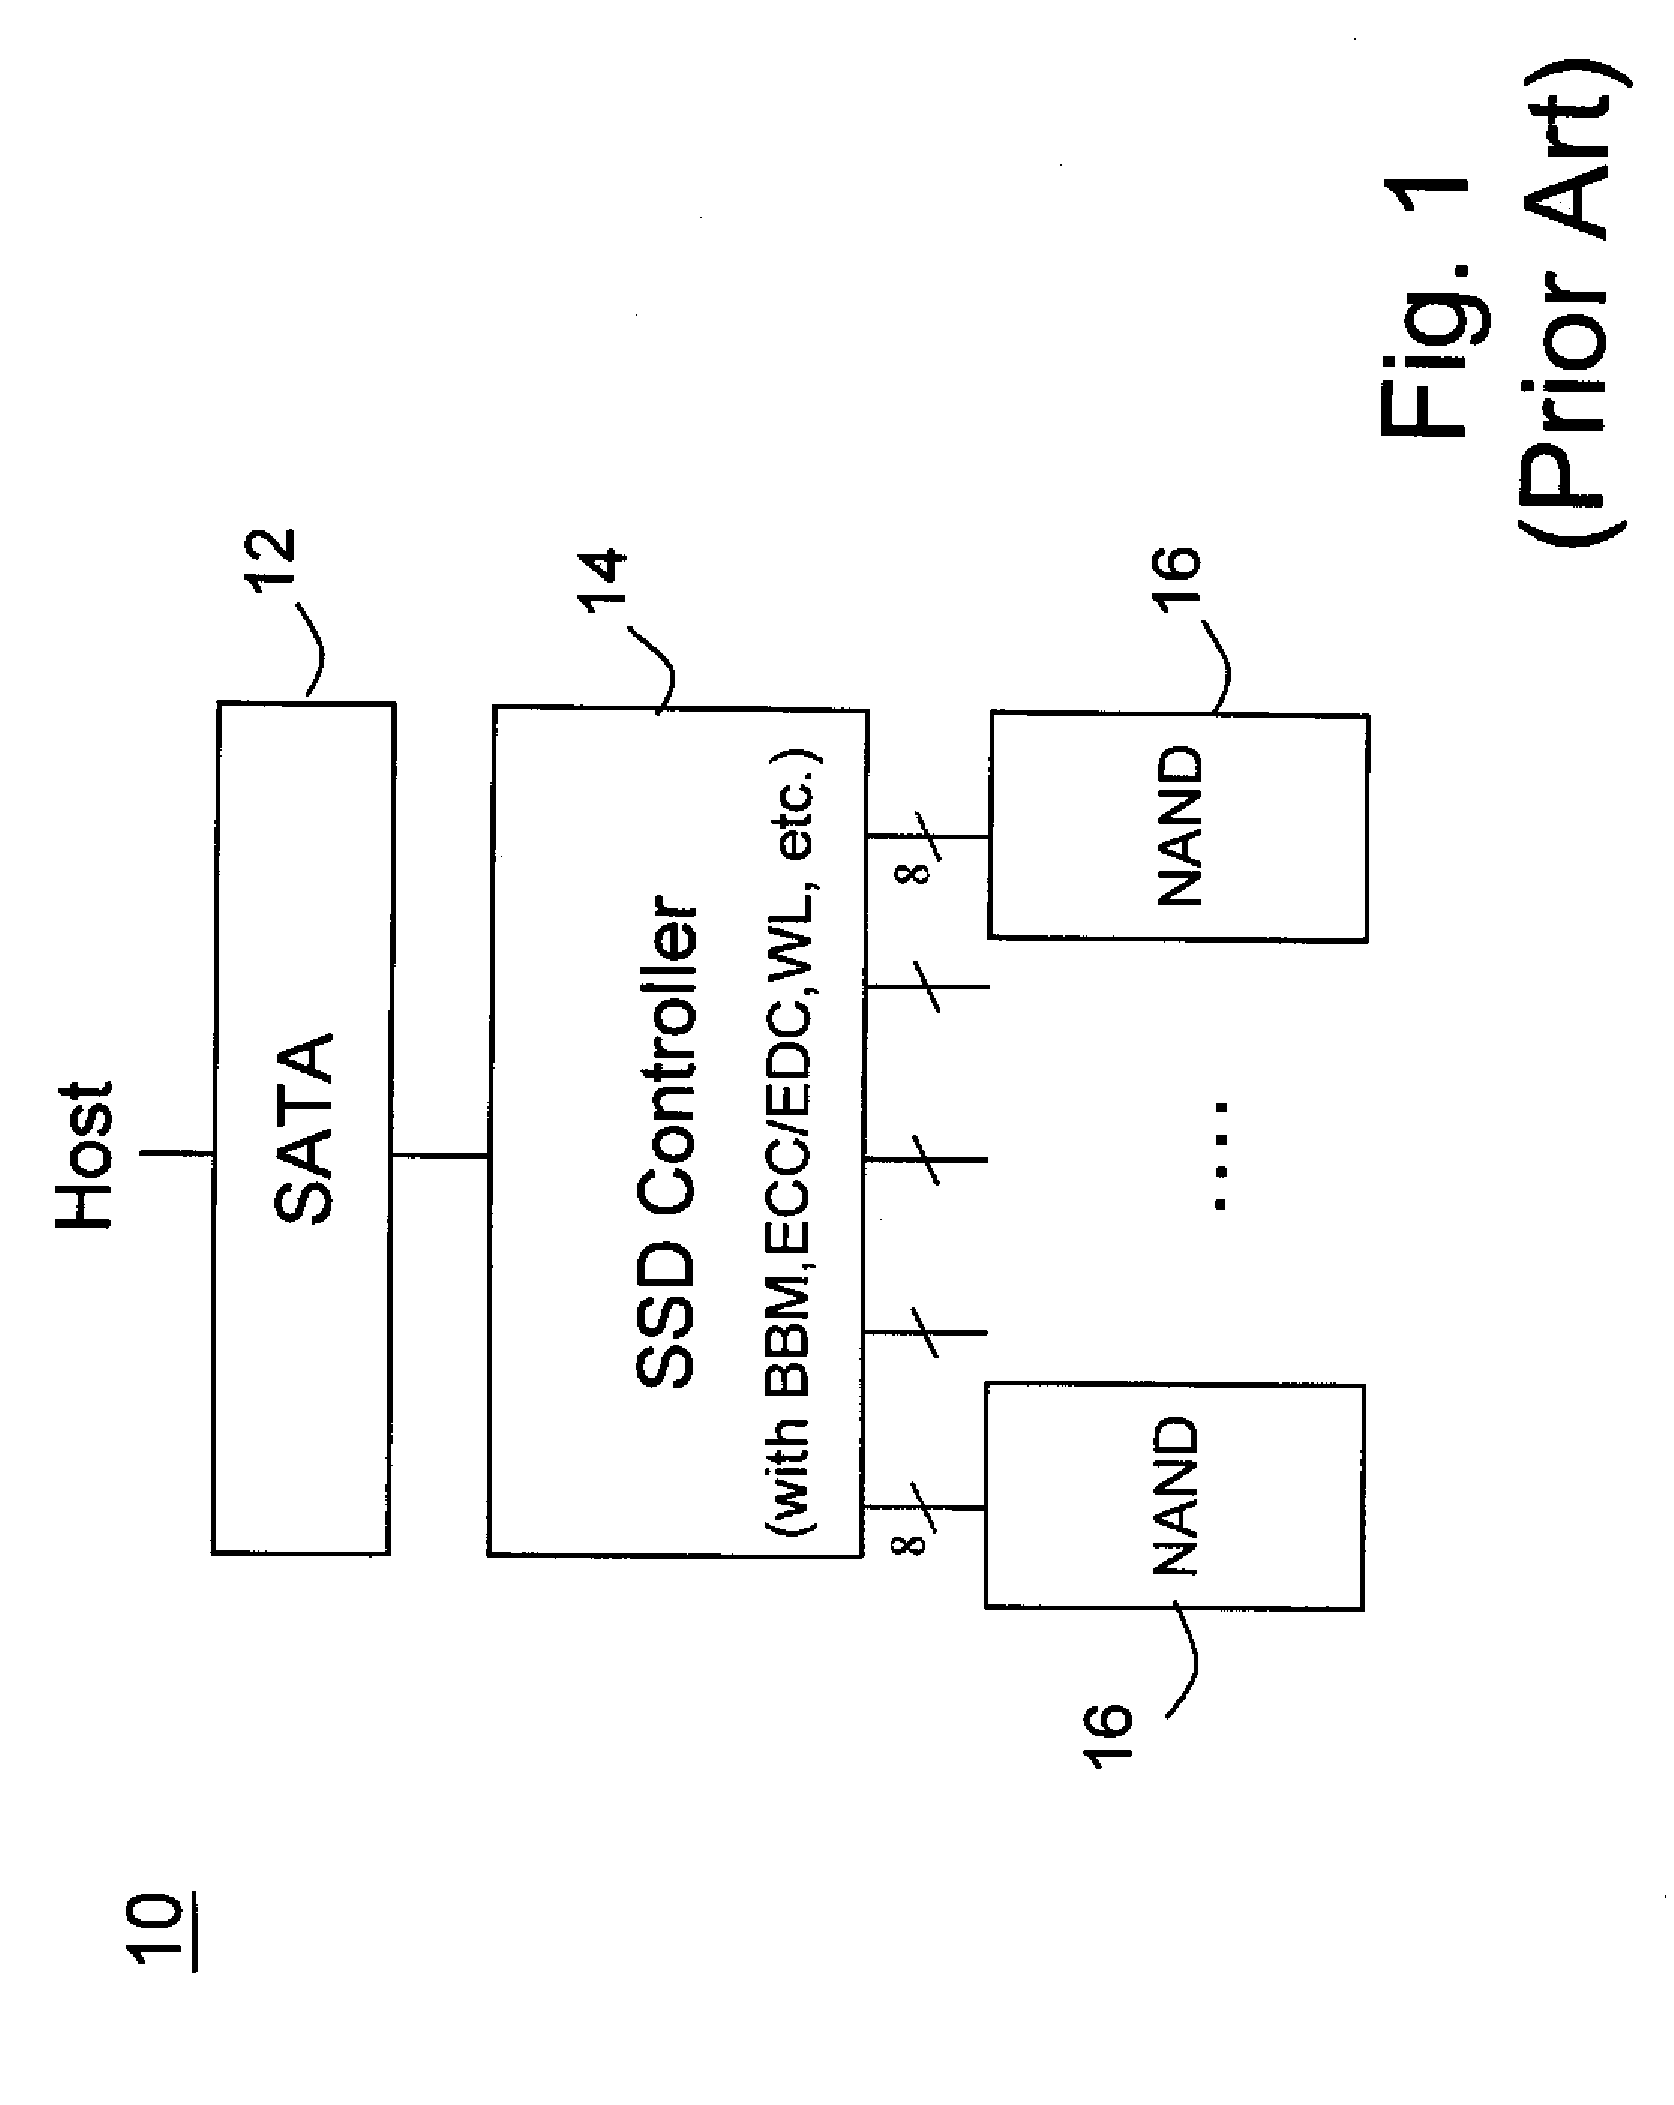 Non-volatile memory storage system with two-stage controller architecture